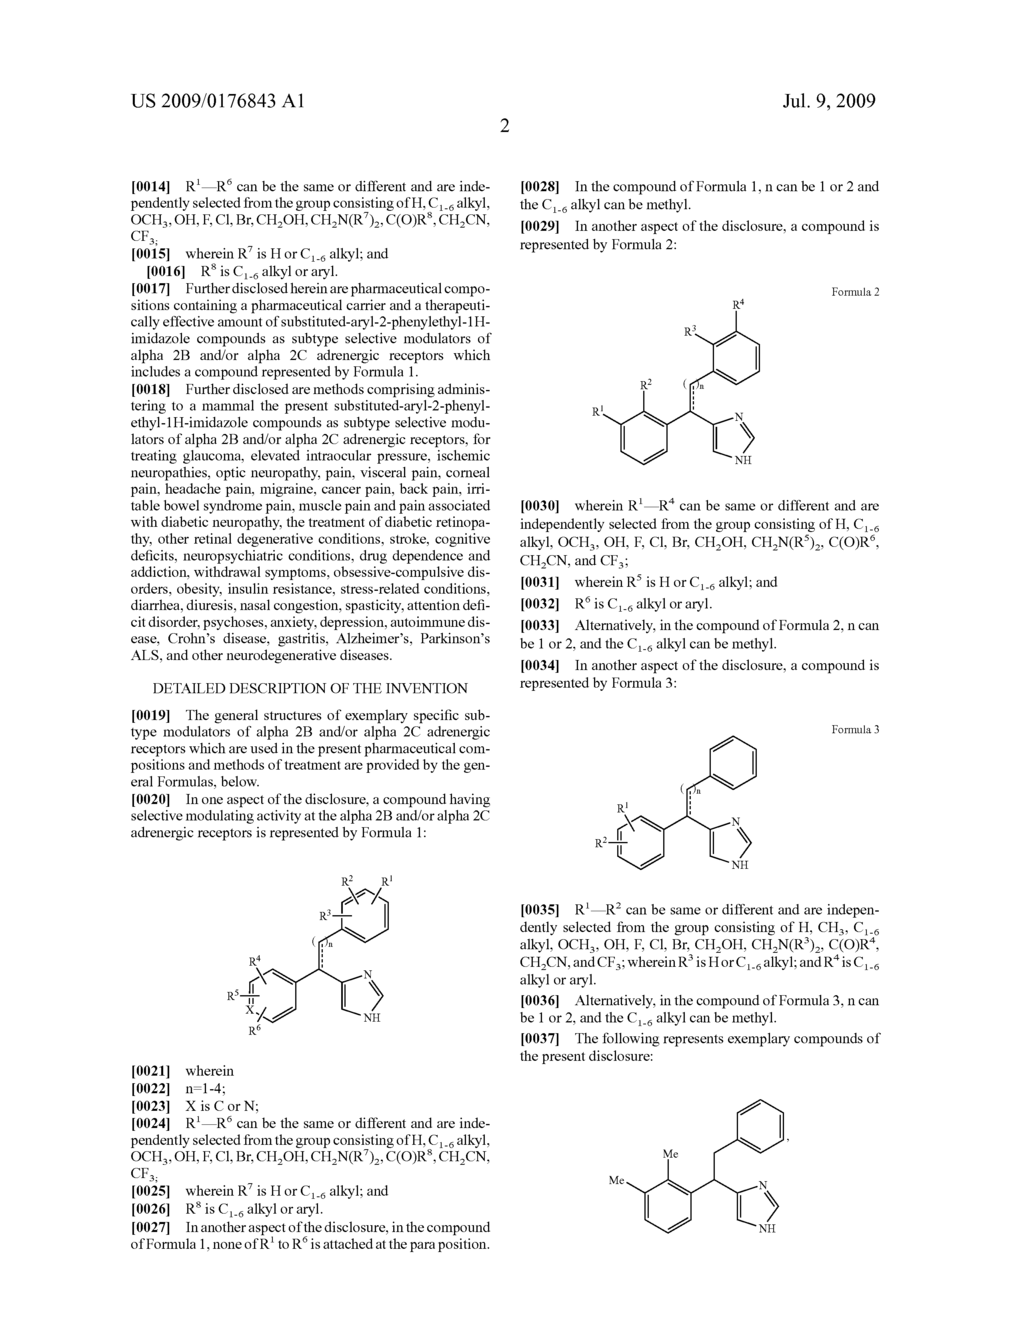 SUBSTITUTED-ARYL-2-PHENYLETHYL-1H-IMIDAZOLE COMPOUNDS AS SUBTYPE SELECTIVE MODULATORS OF ALPHA 2B AND/OR ALPHA 2C ADRENERGIC RECEPTORS - diagram, schematic, and image 03